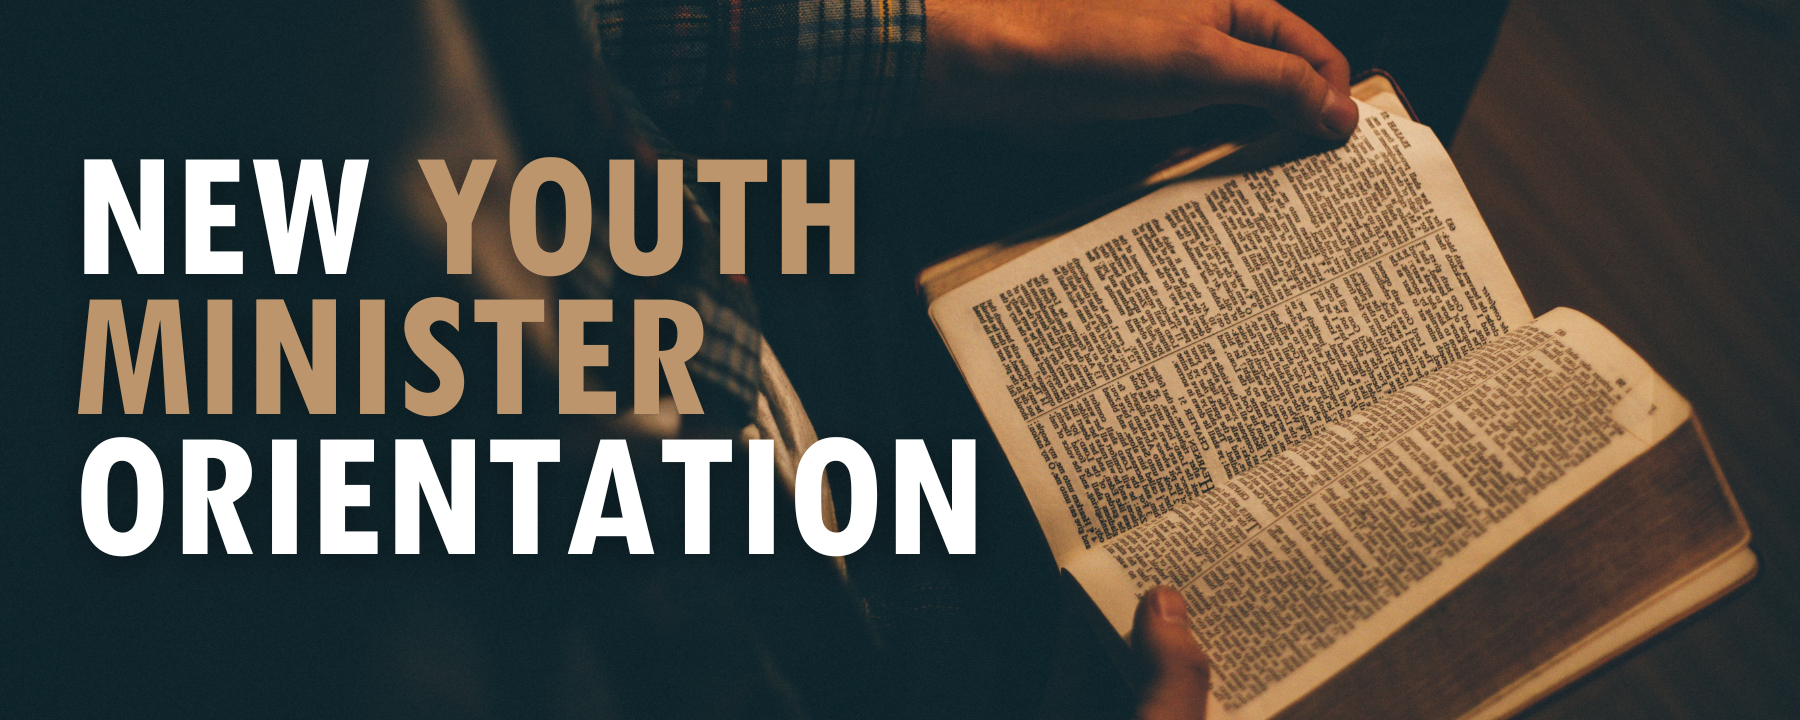 New Youth Minister Orientation